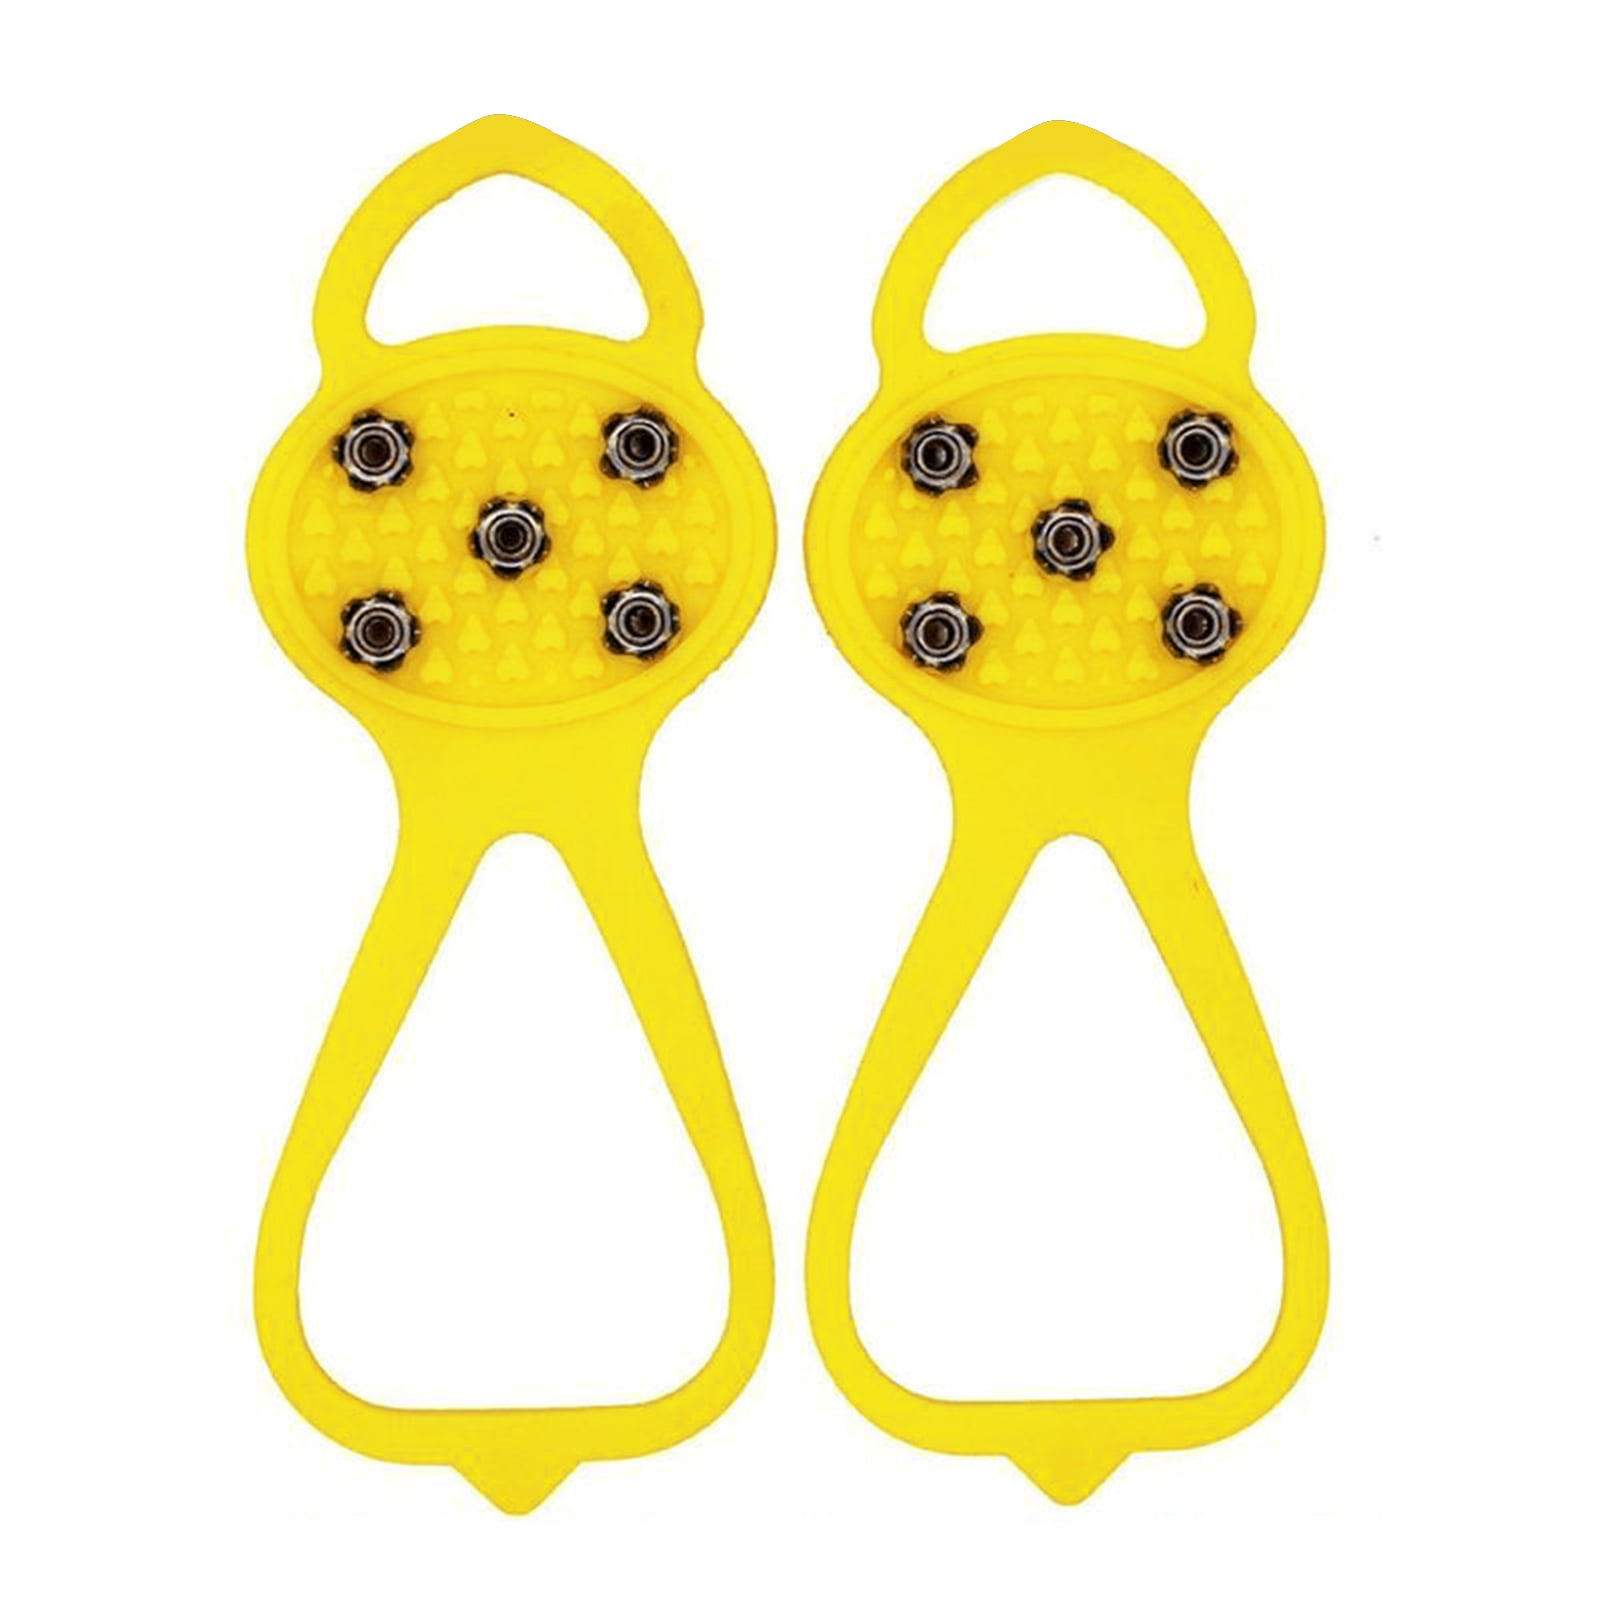 Details about   Universal Non-Slip Gripper Spikes Over Shoe Durable Cleats Good Elasticity Set 